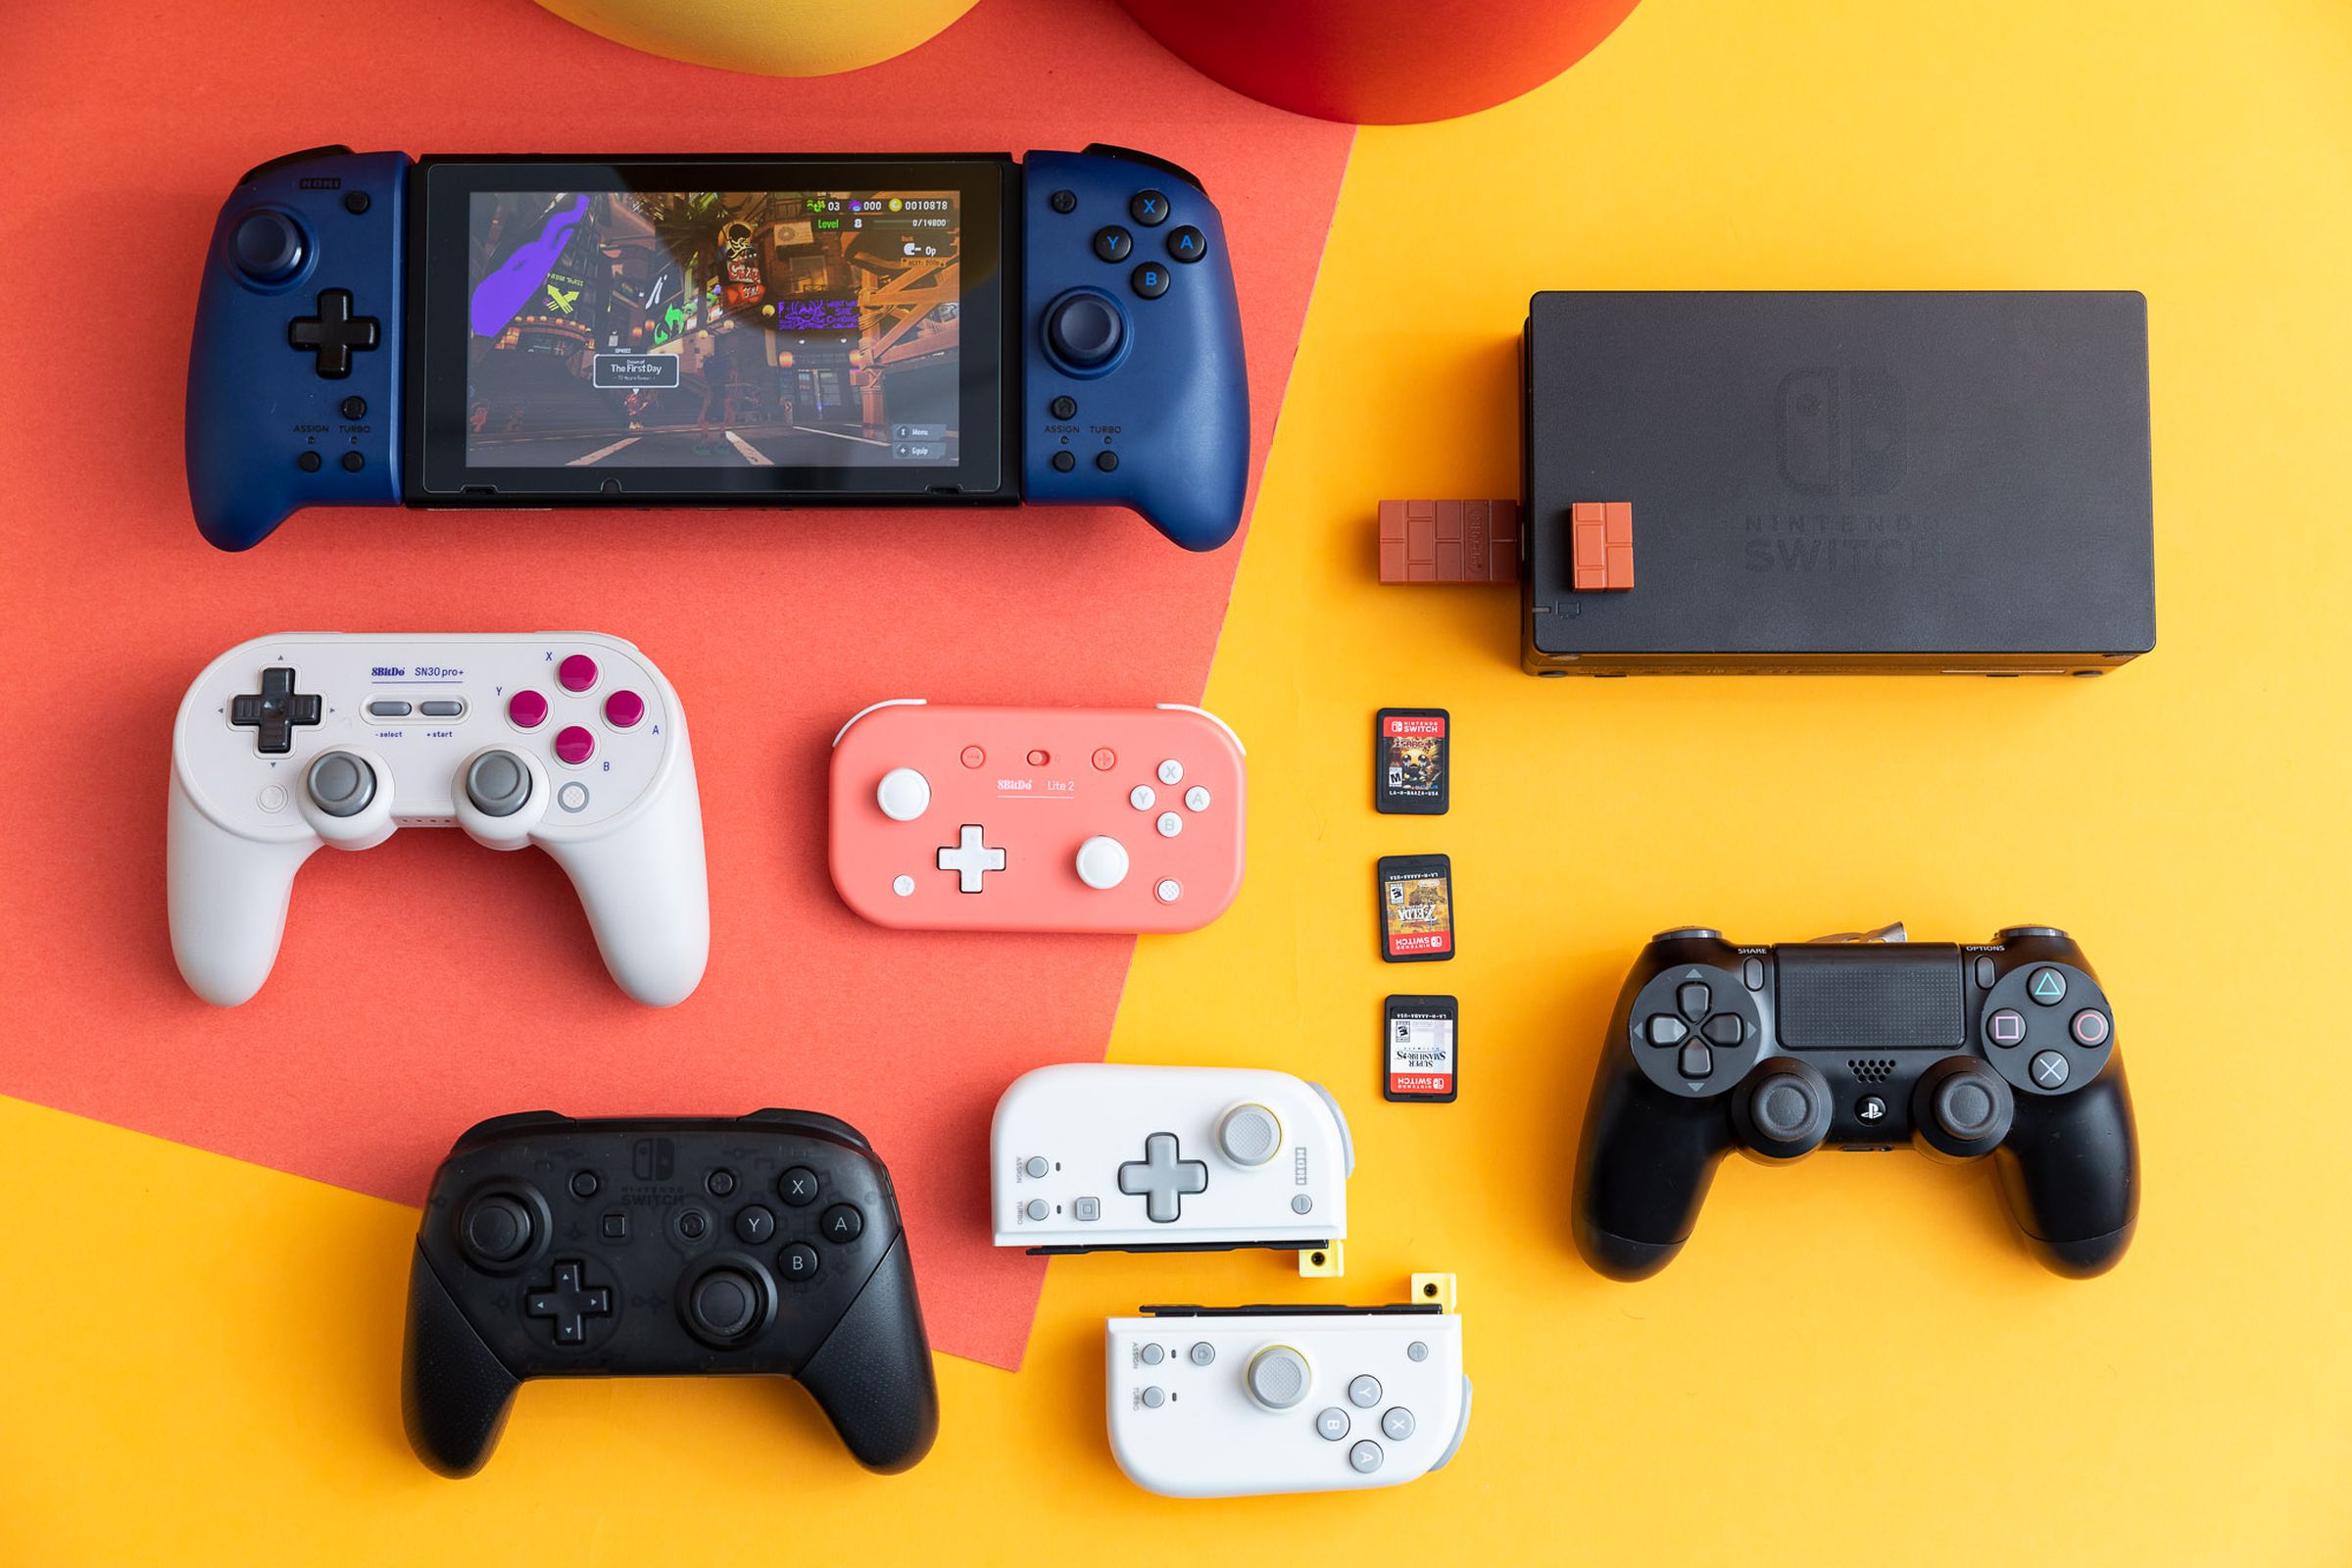 An artful arrangement of gaming controllers and accessories for the Nintendo Switch.